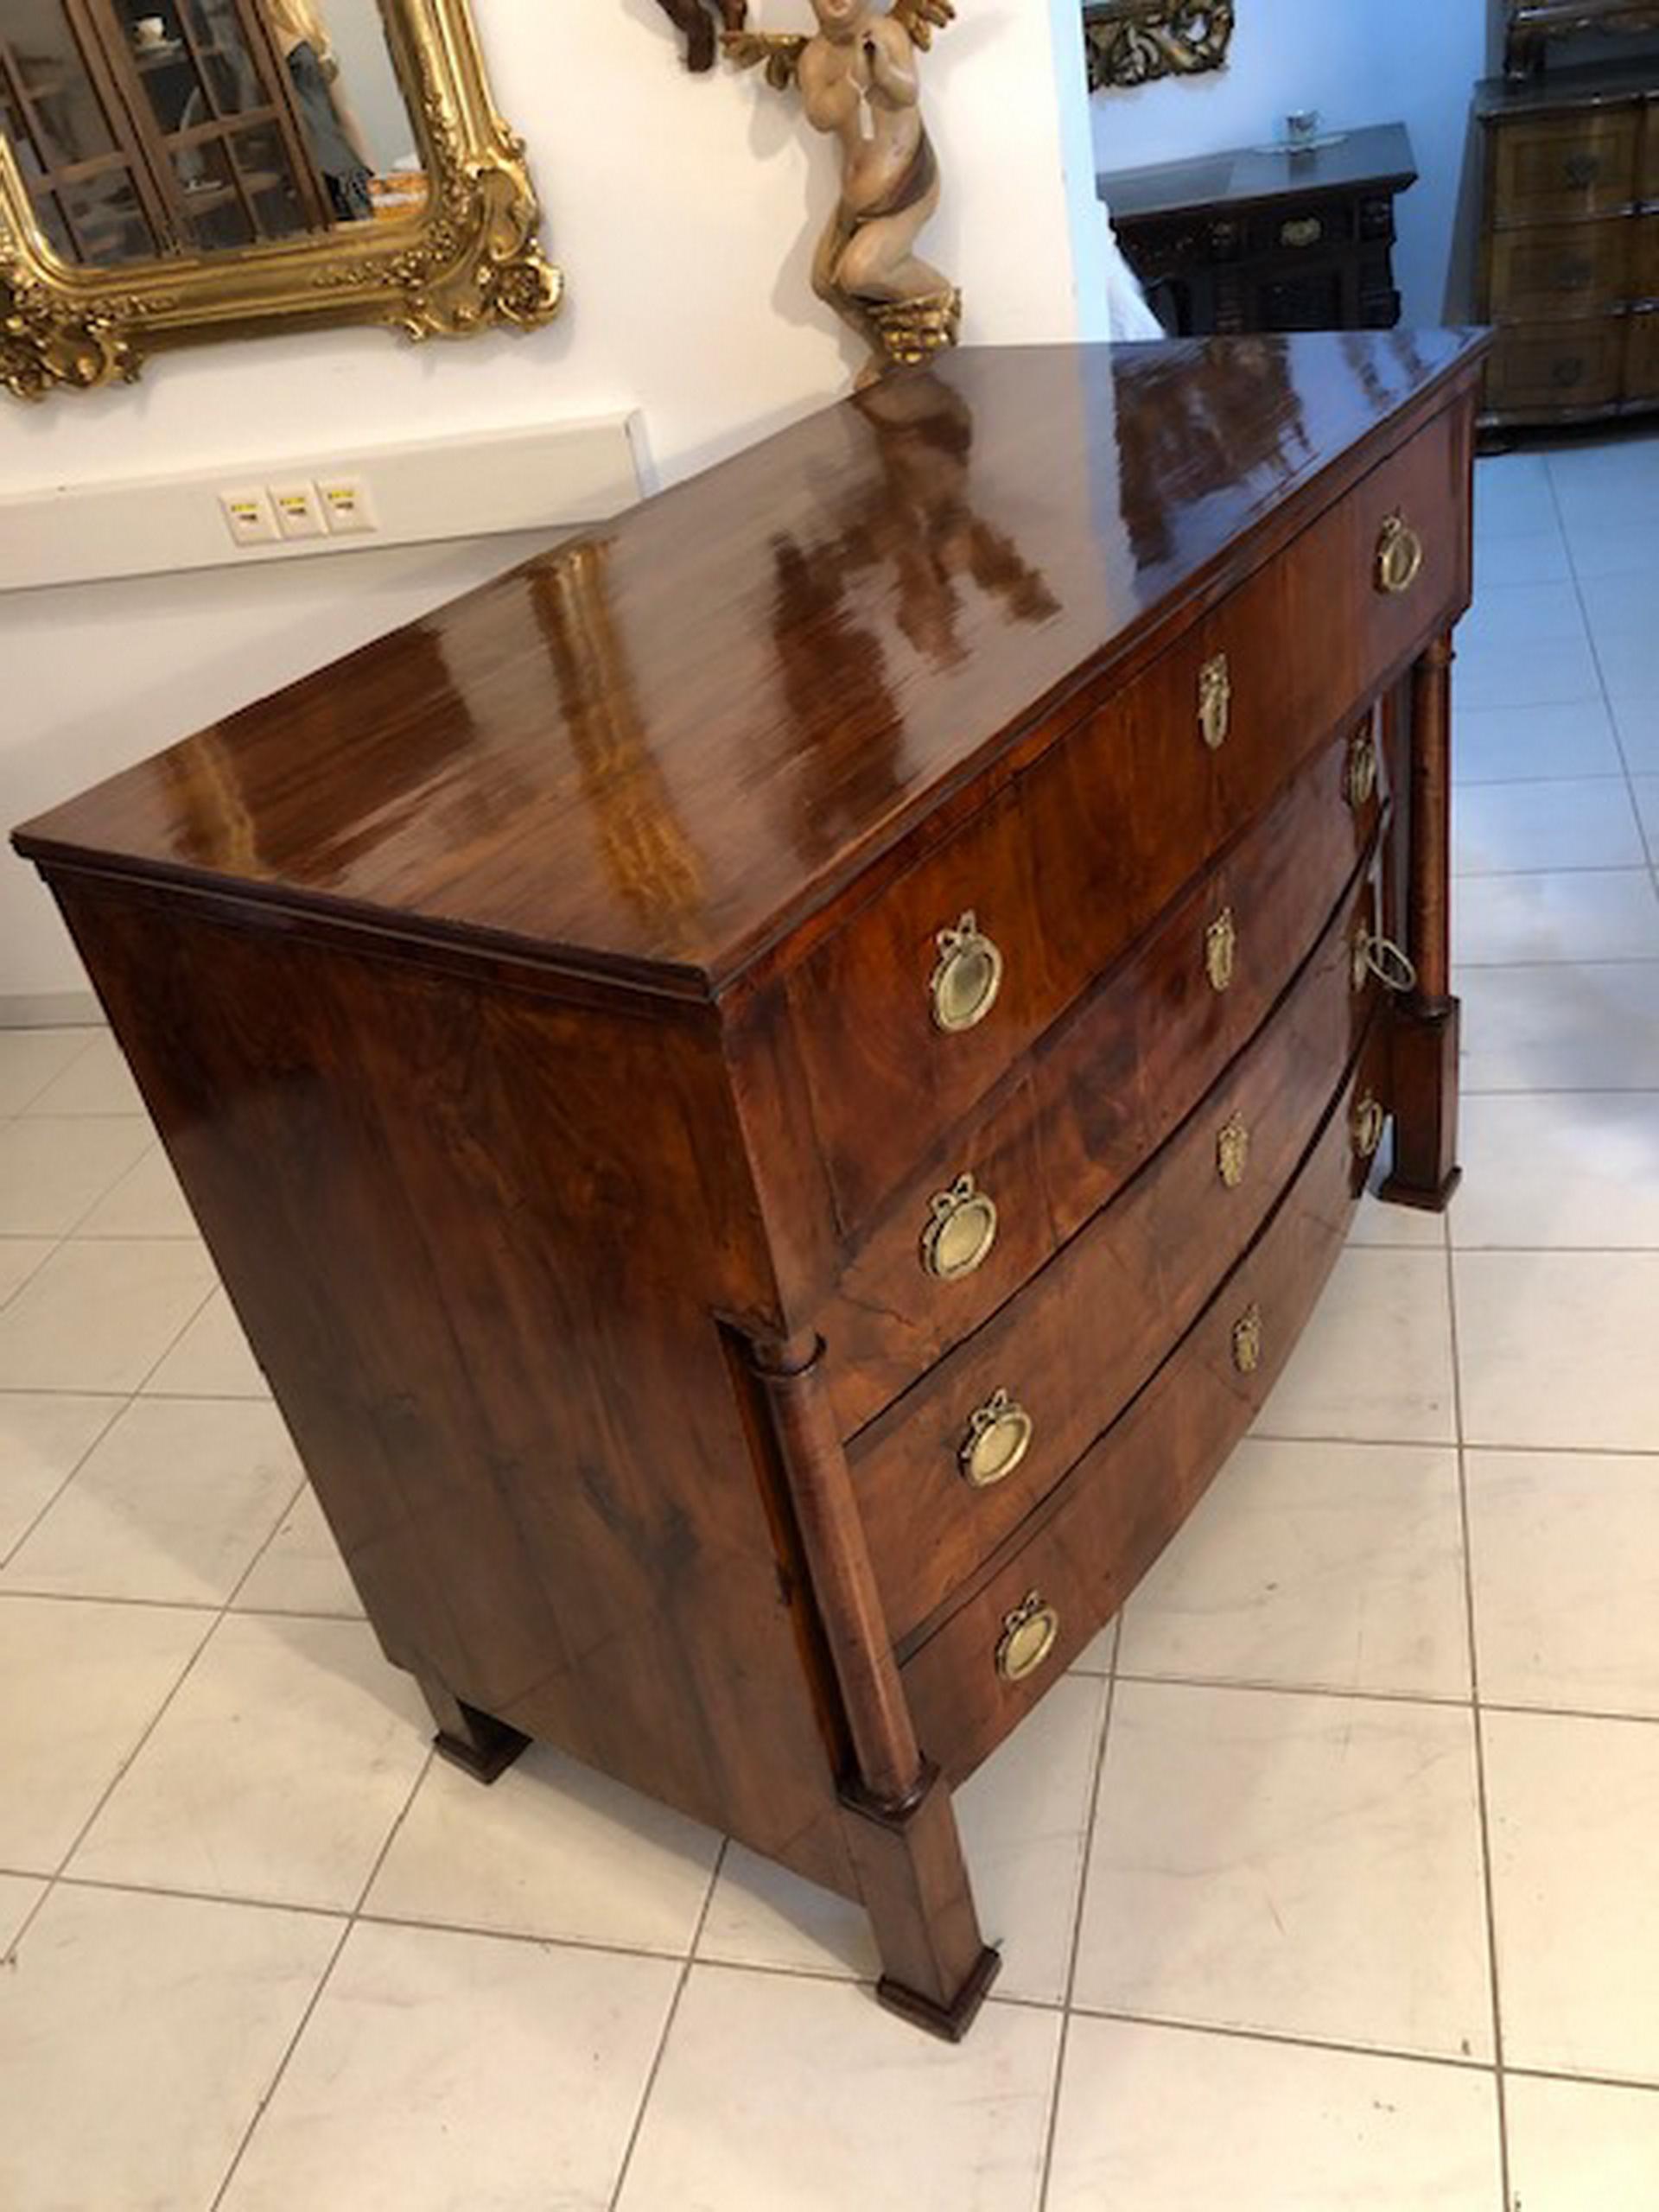 Original restored Empire era four-drawer dresser. This is a very nice Empire chest from circa 1815
which is especially beautiful as well as very noble and practical.
Very appealing design with a stunning veneer picture and features splendid